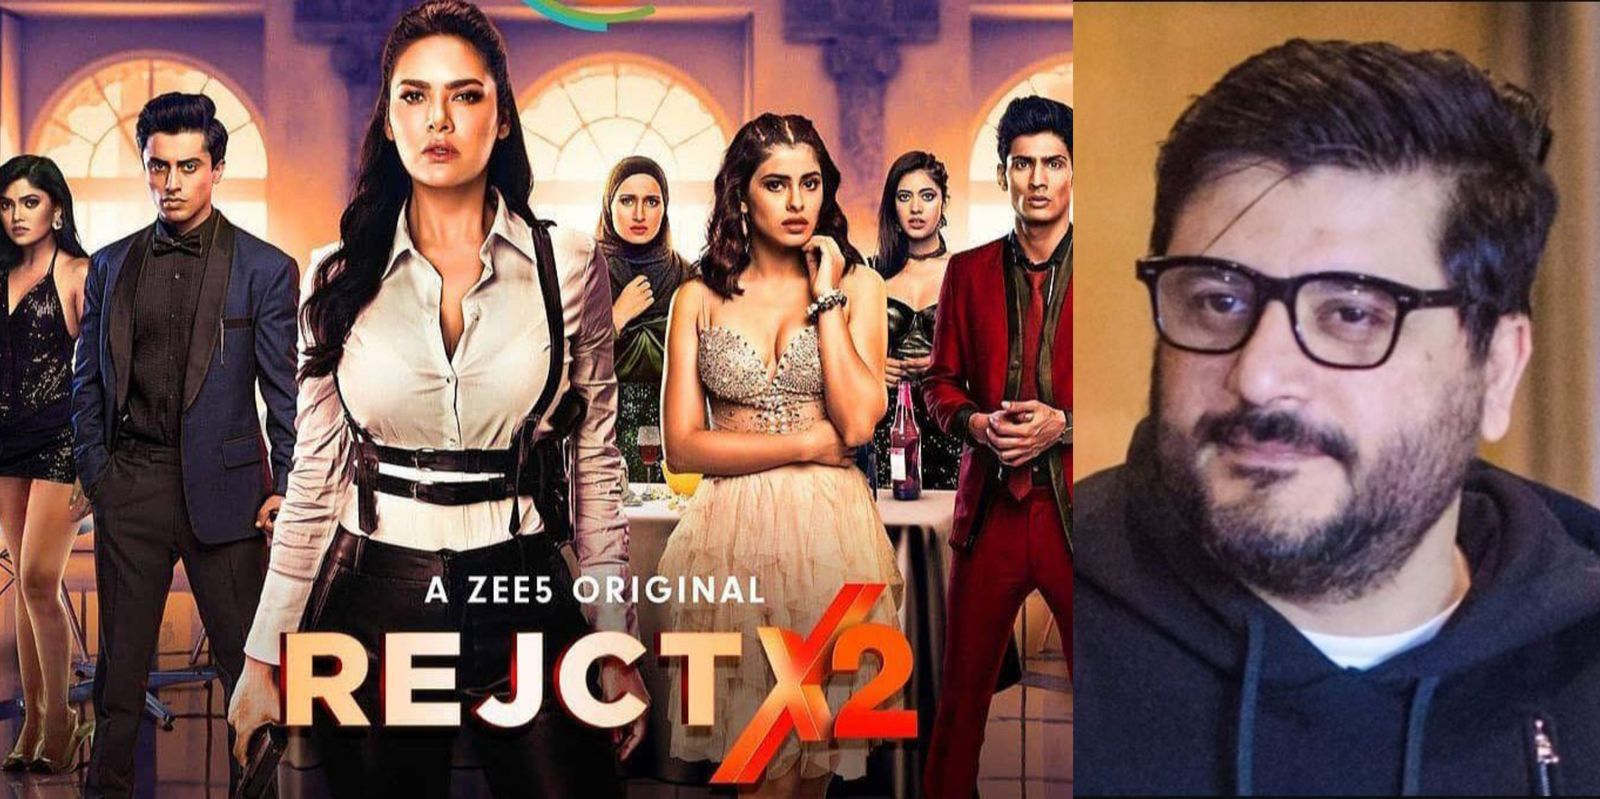 Rejctx 2: Esha Gupta Was Asked To Consider The Kids As Products Of Nepotism For Her Role, Reveals Goldie Behl